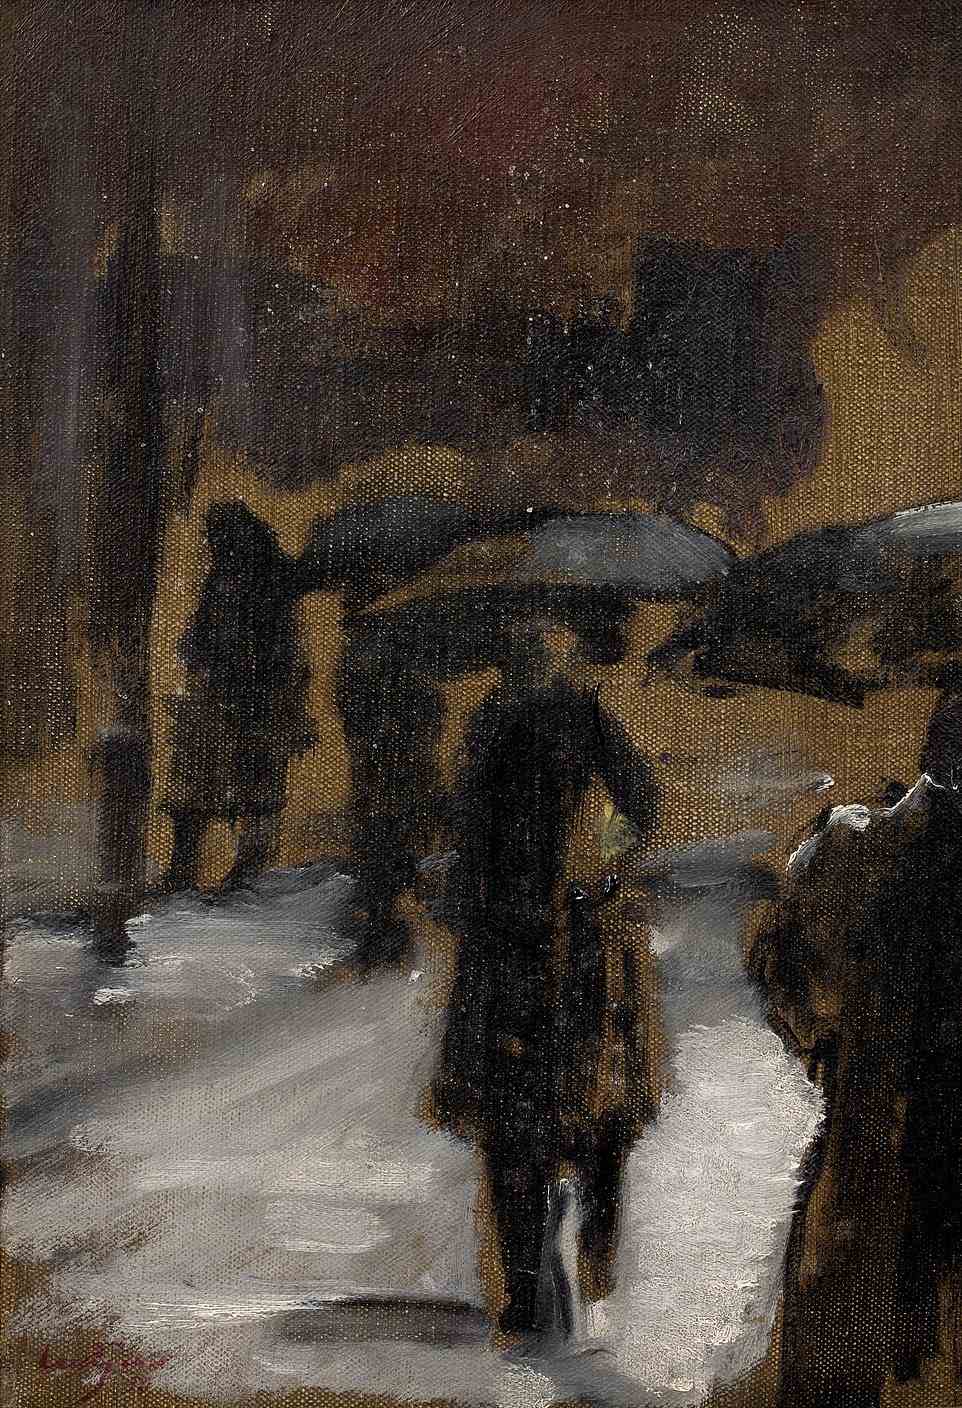 An unnerving painting by a Victorian artist who some experts believe was notorious serial killer Jack the Ripper has sold for £14,000. Walter Sickert's 'Figures in the Rain' went for more than double its upper sale estimate of £6,000 at an Oxford auction house on Wednesday